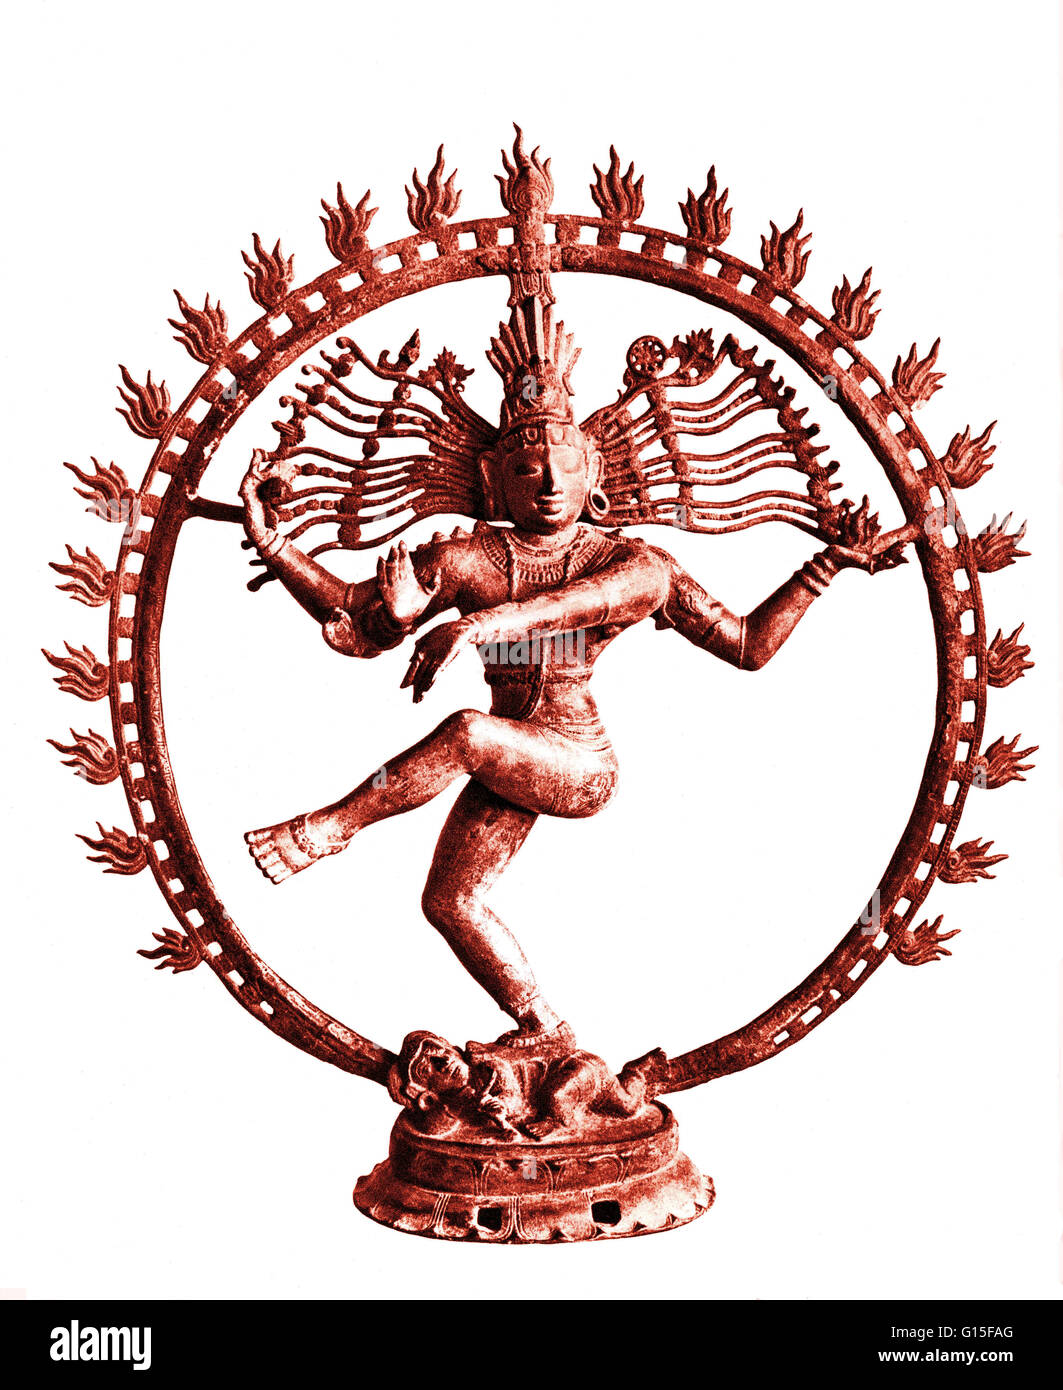 Shiva dancing in circle of flames. 11th cen. Bronze. Shiva is the third member of the Hindu Trimurti. He acts as the destroyer or transformer of the universe. Stock Photo